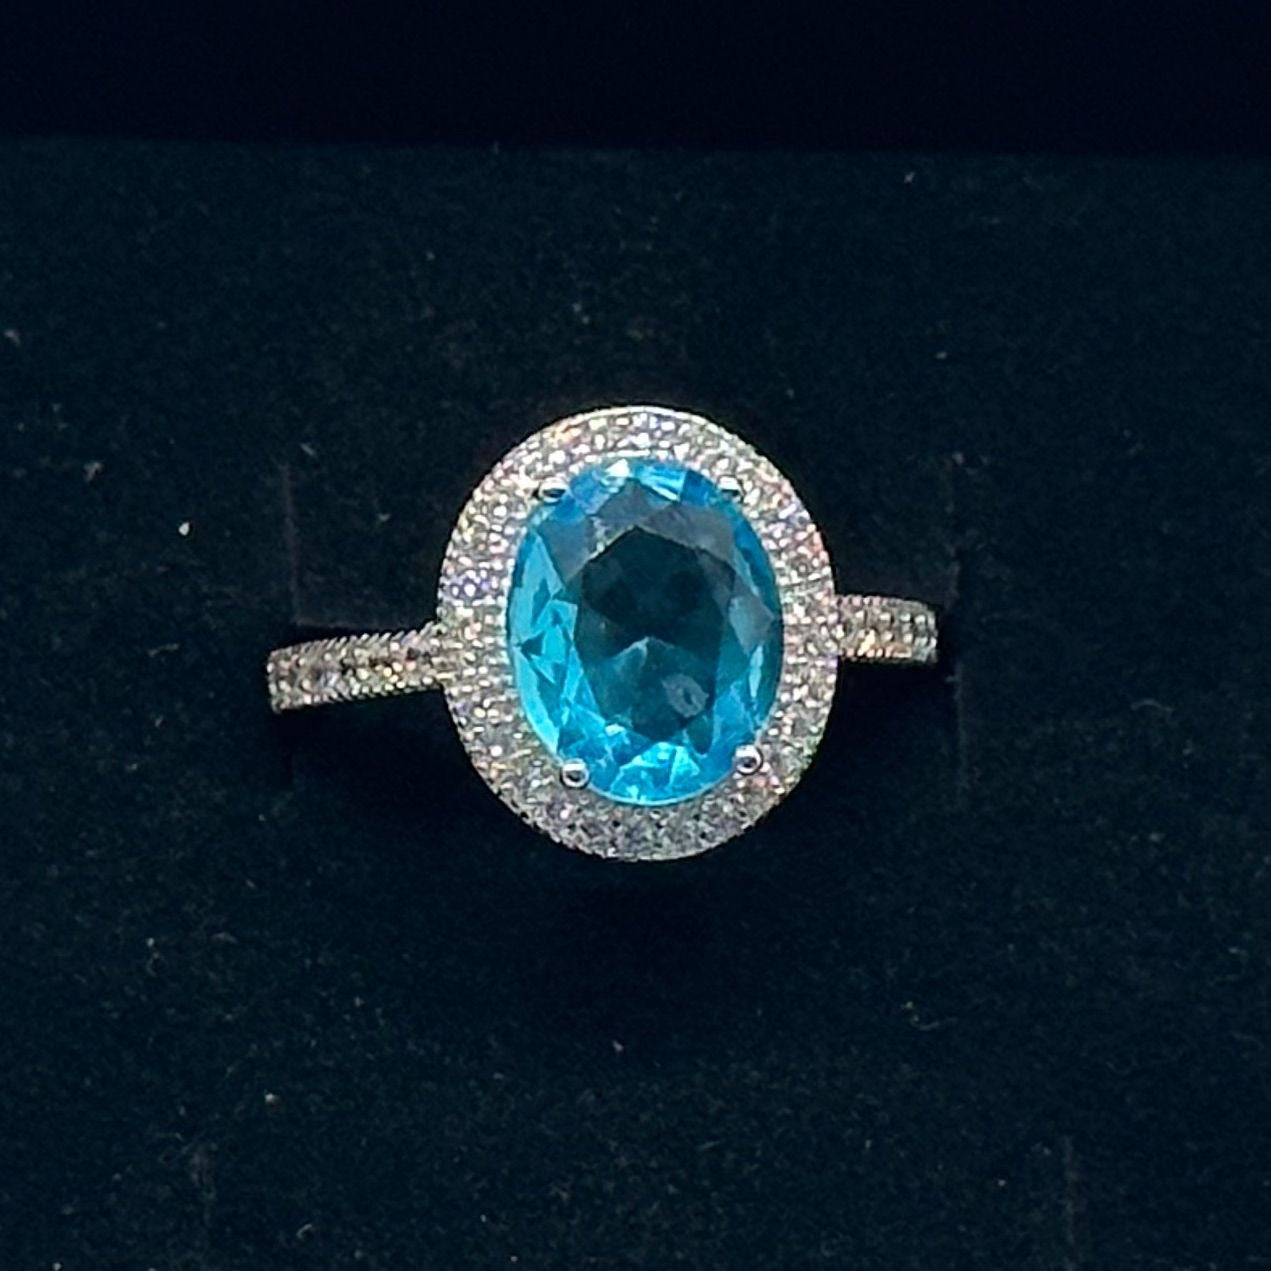 Brilliant Oval 3.60 Carat Blue Topaz Ring - Size 7 - Sterling Silver Setting